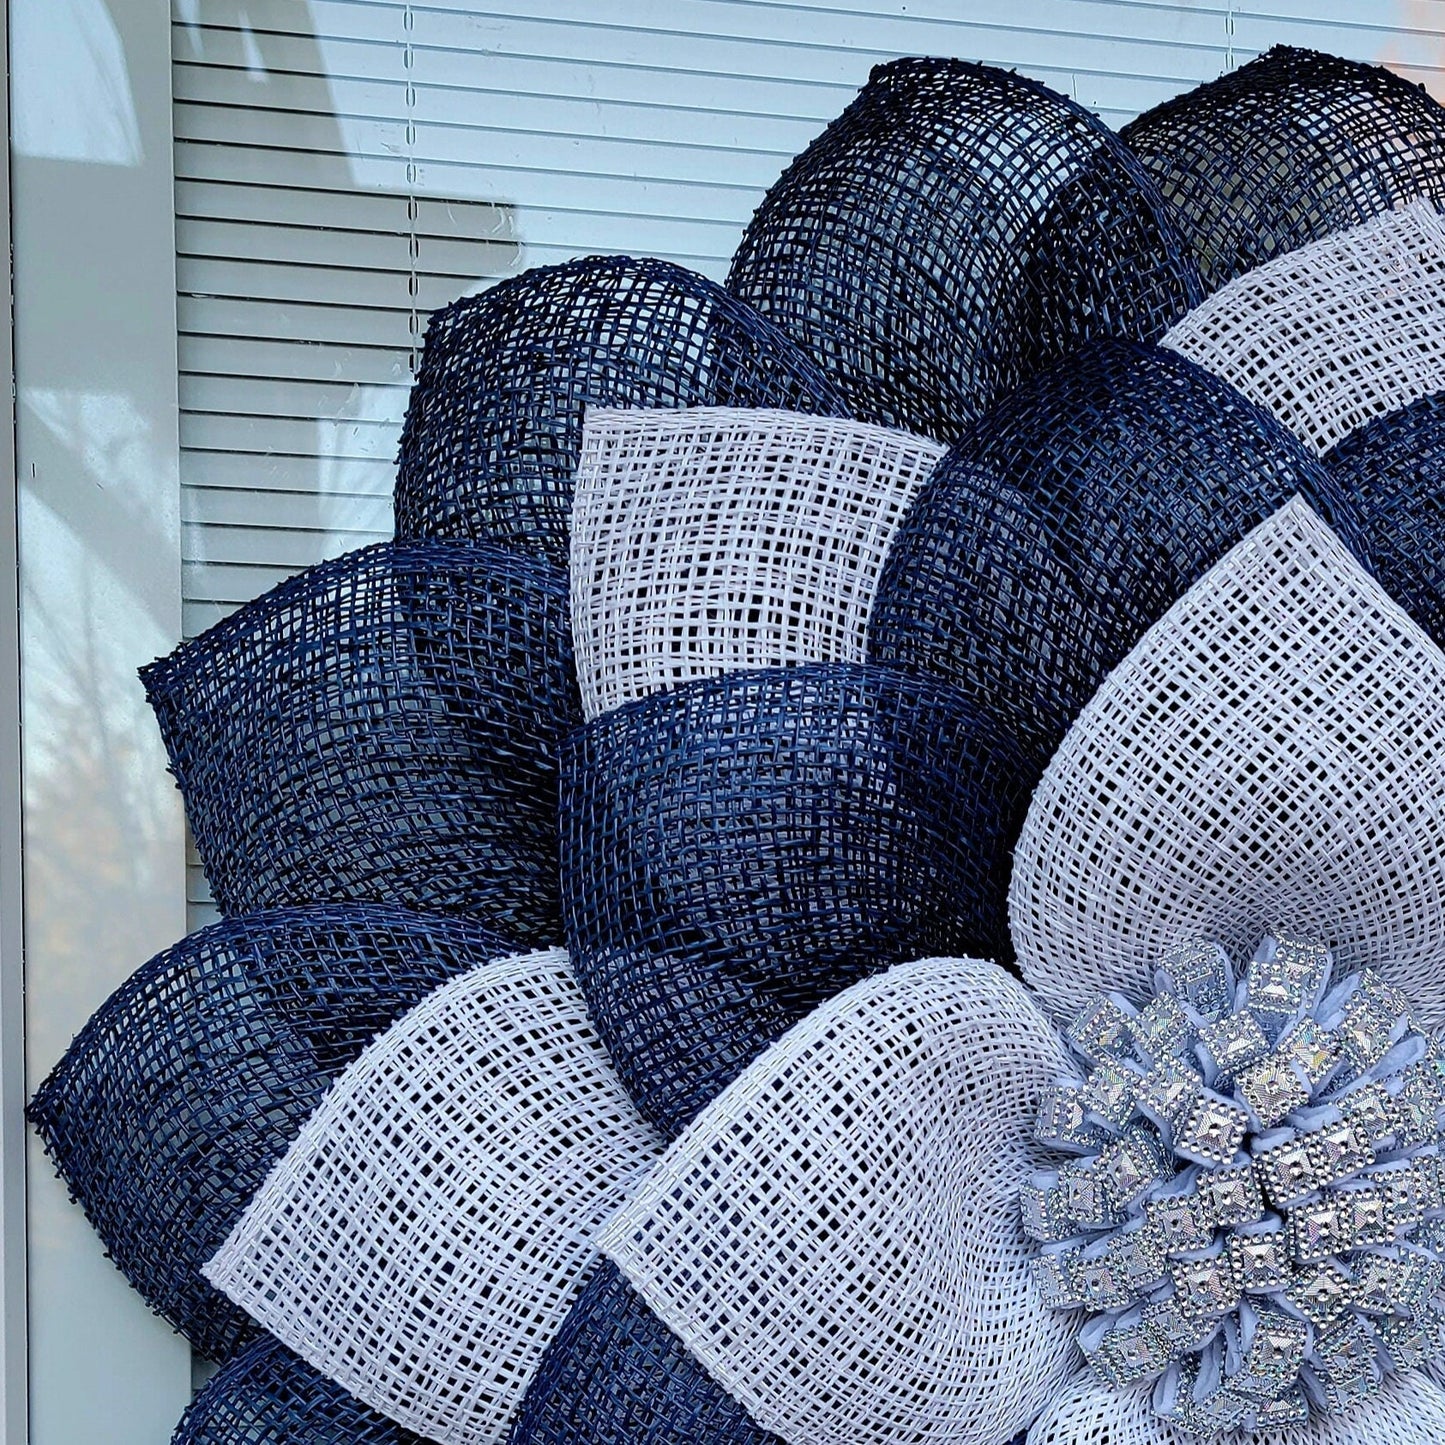 Navy and White Burlap Silver Bling Flower Wreath